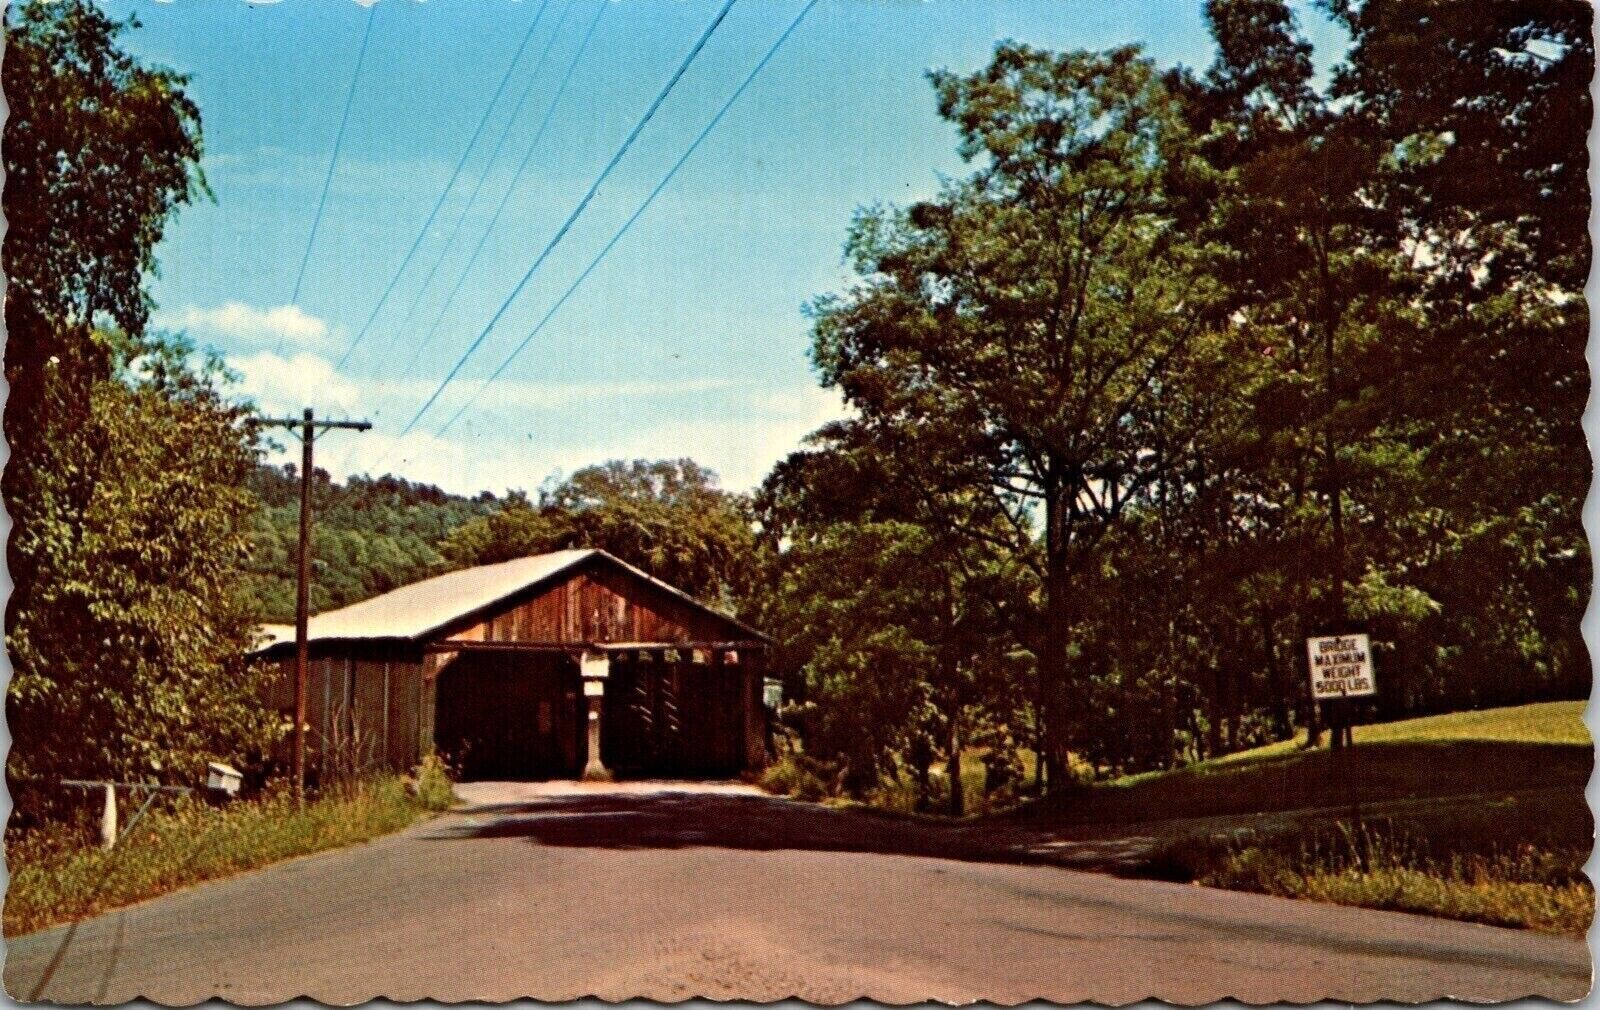 Pulpmill Covered Bridge Middlebury Vermont Street View Otter Creek VNG Postcard